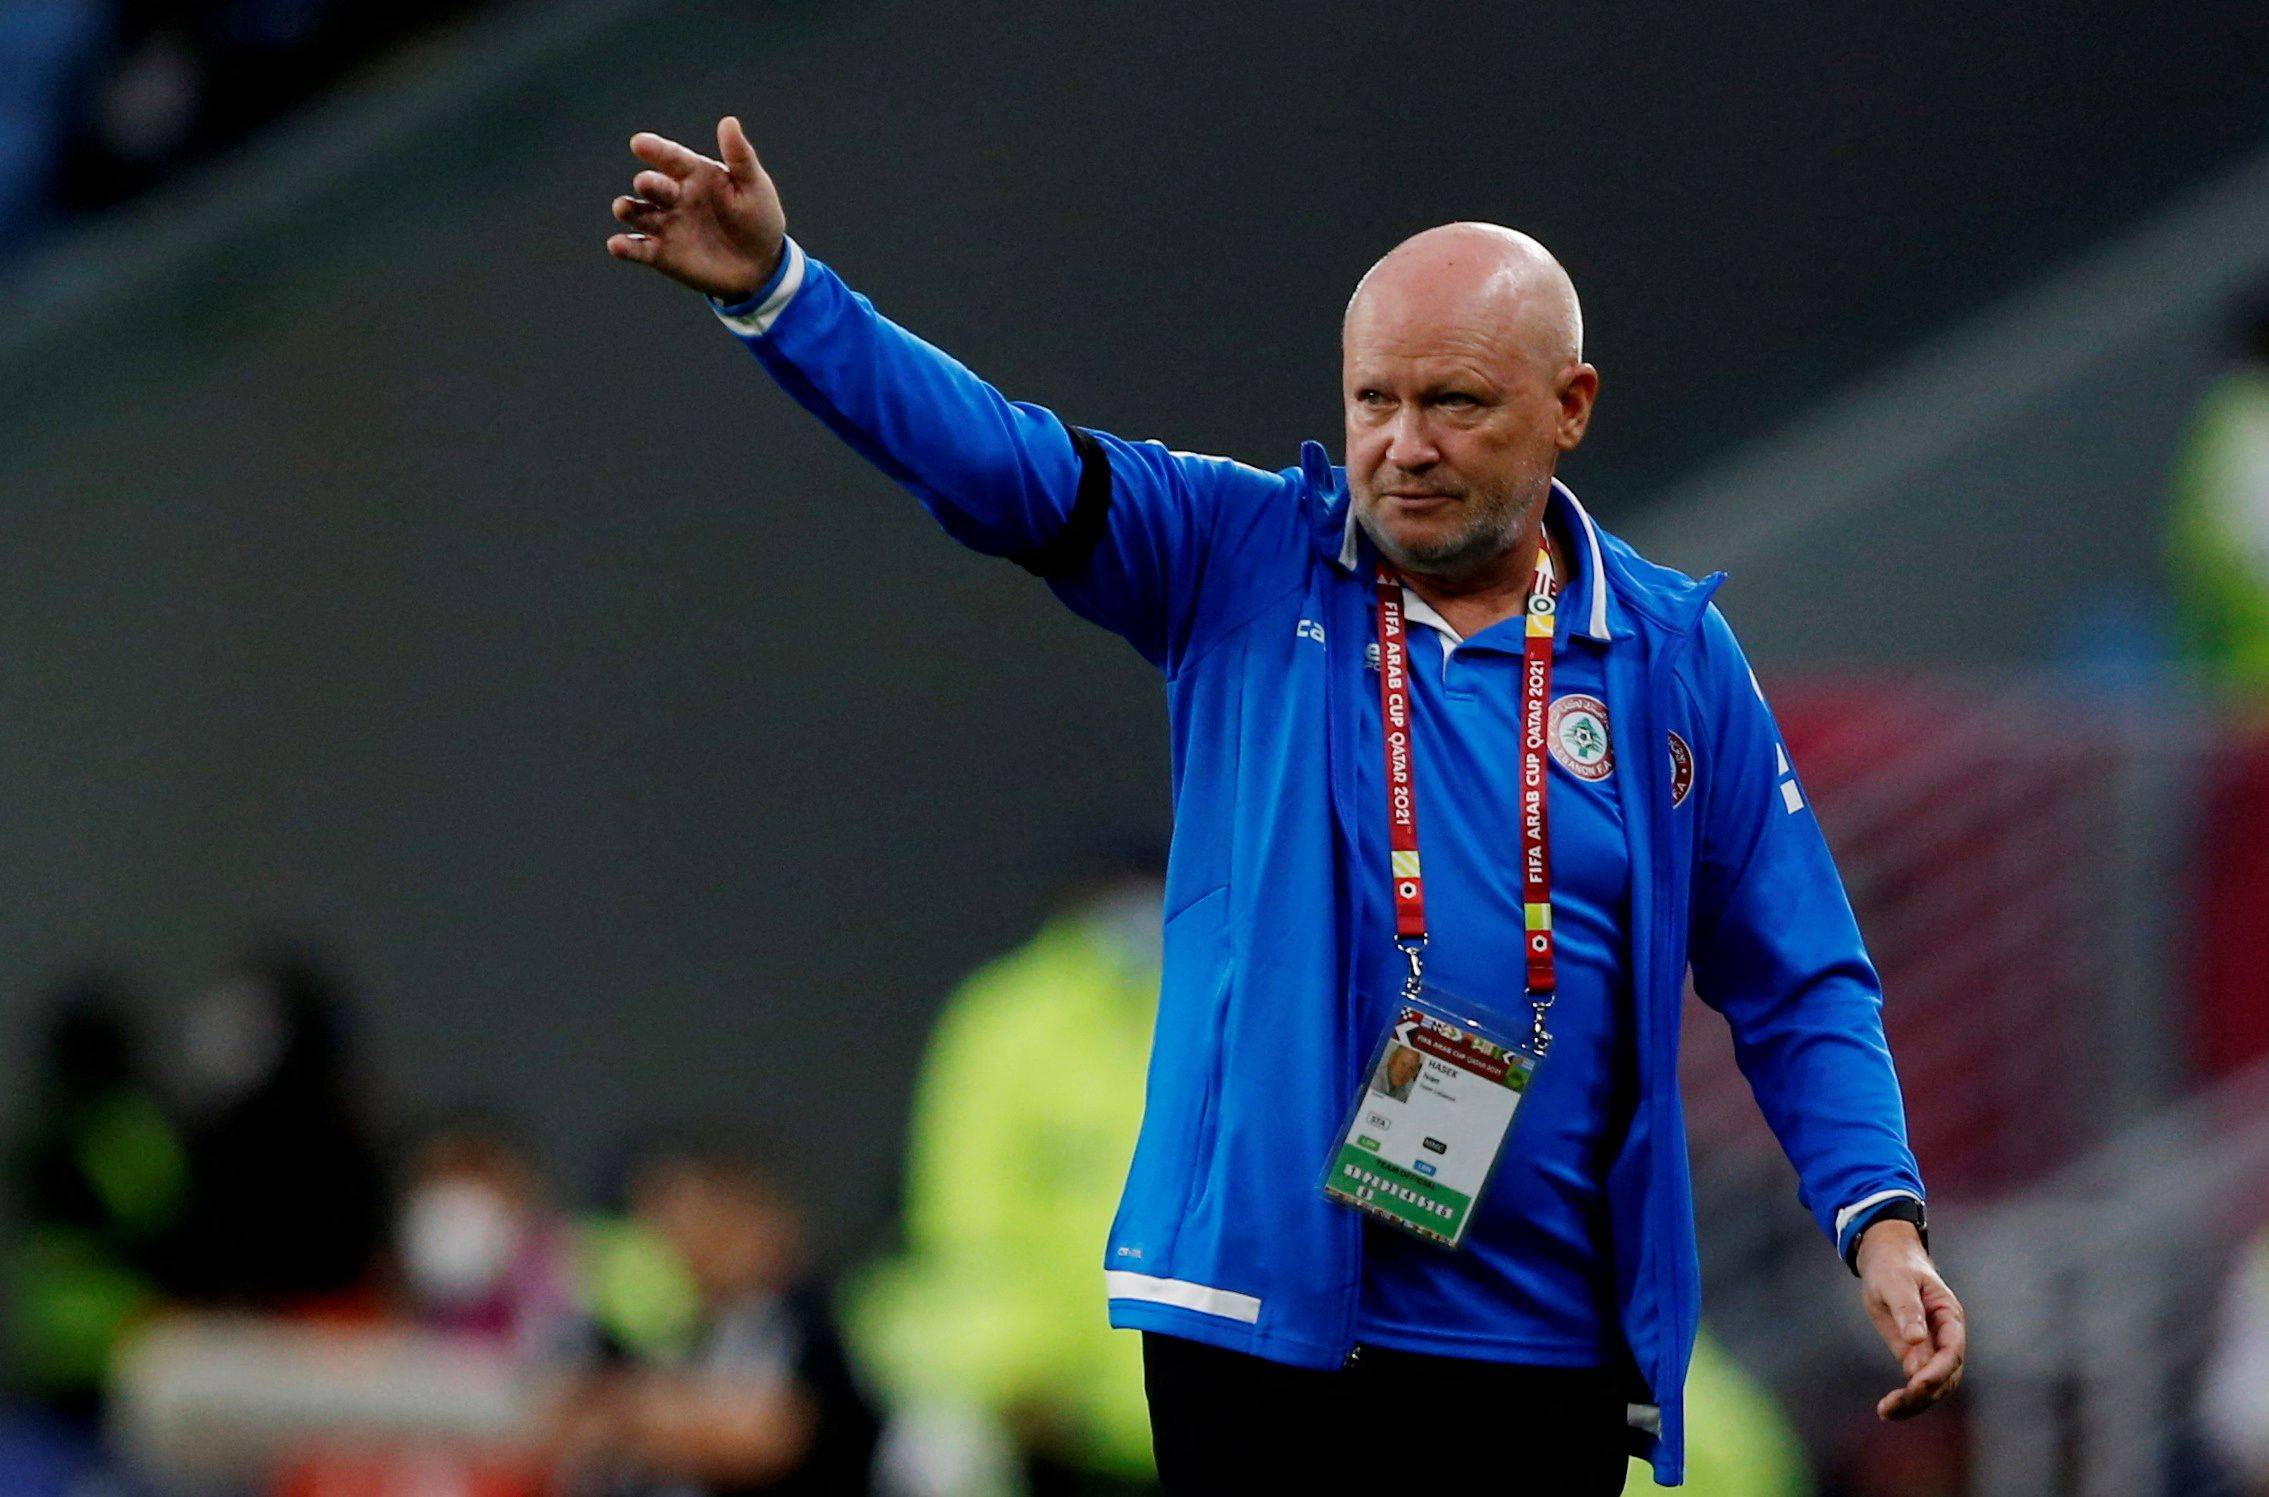 Czech Coach: I Hope My Players Say After Tomorrow's Match That They Faced Ronaldo and Beat Him